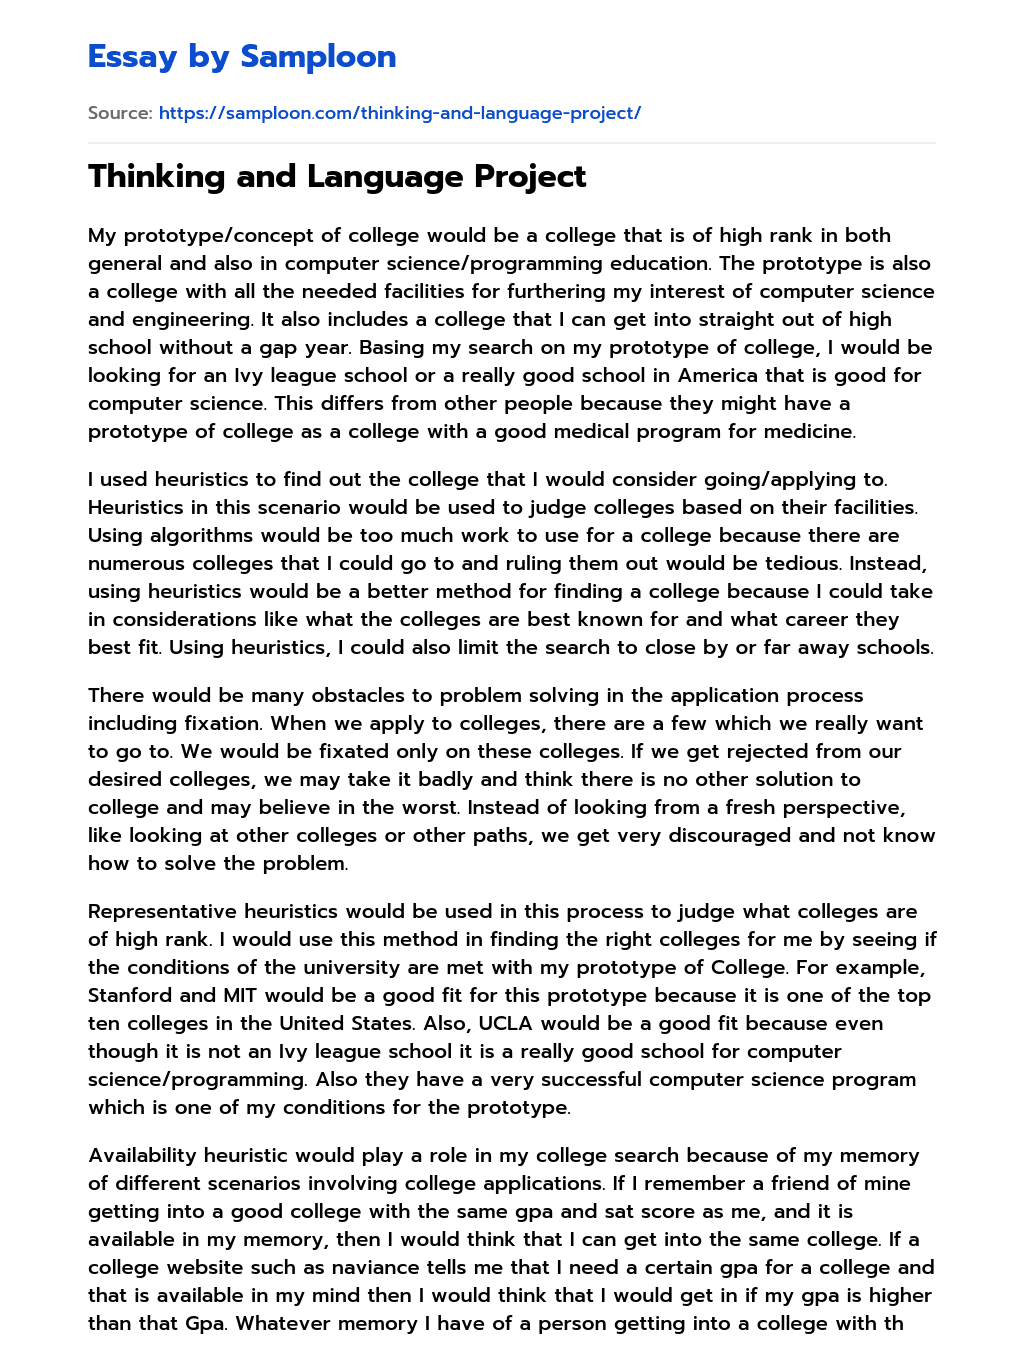 Thinking and Language Project essay